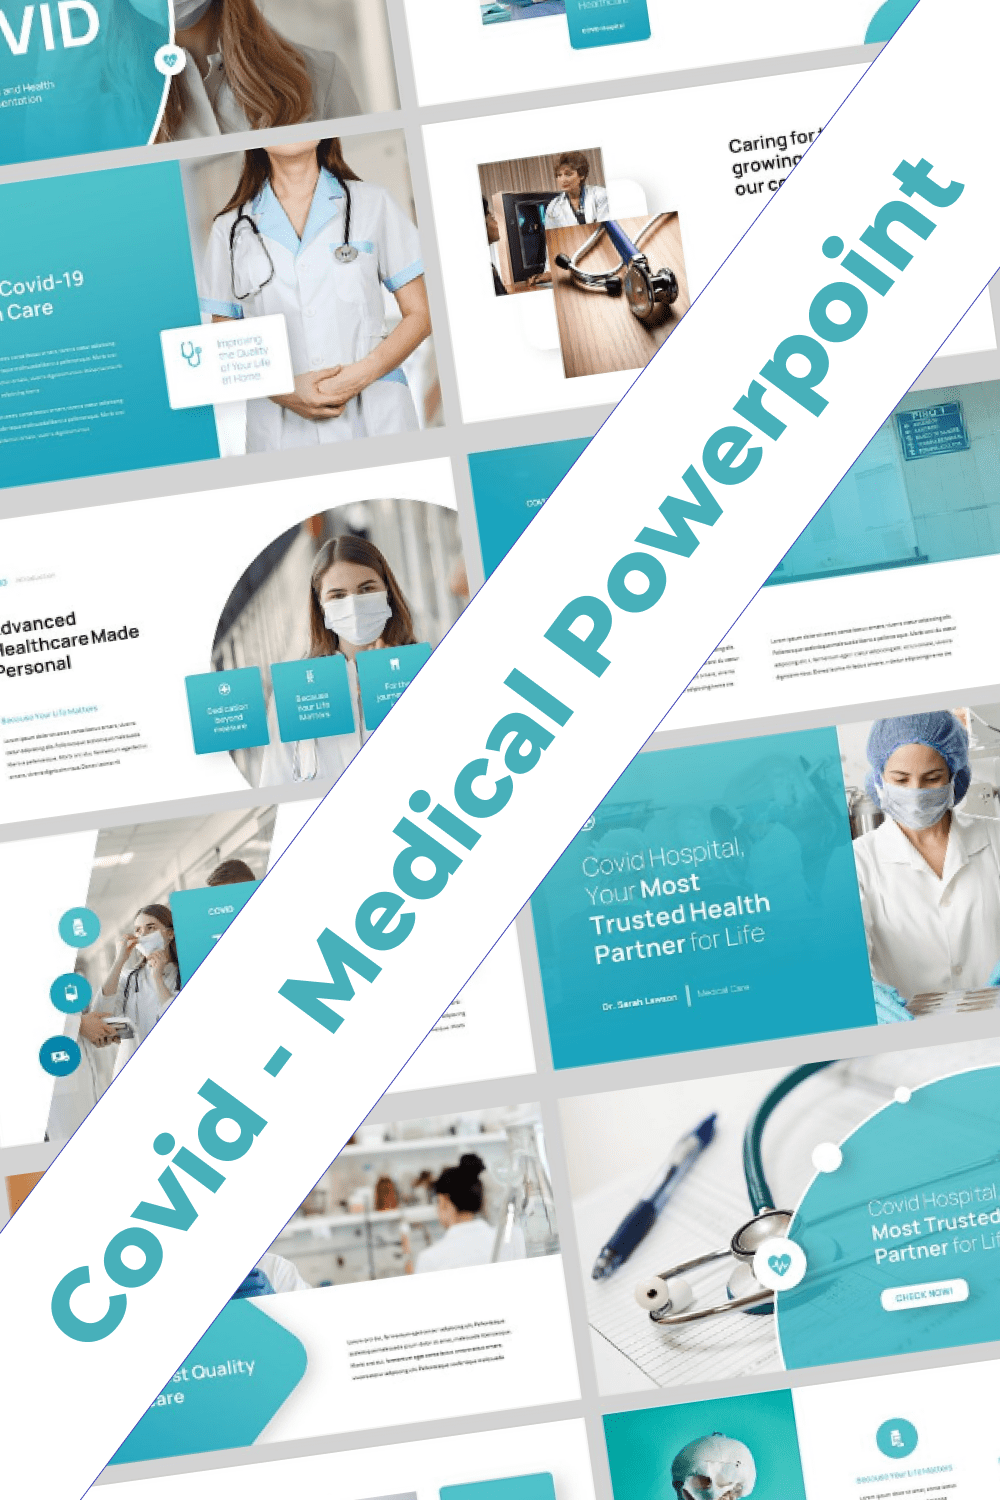 Covid - Medical Powerpoint Pinterest.